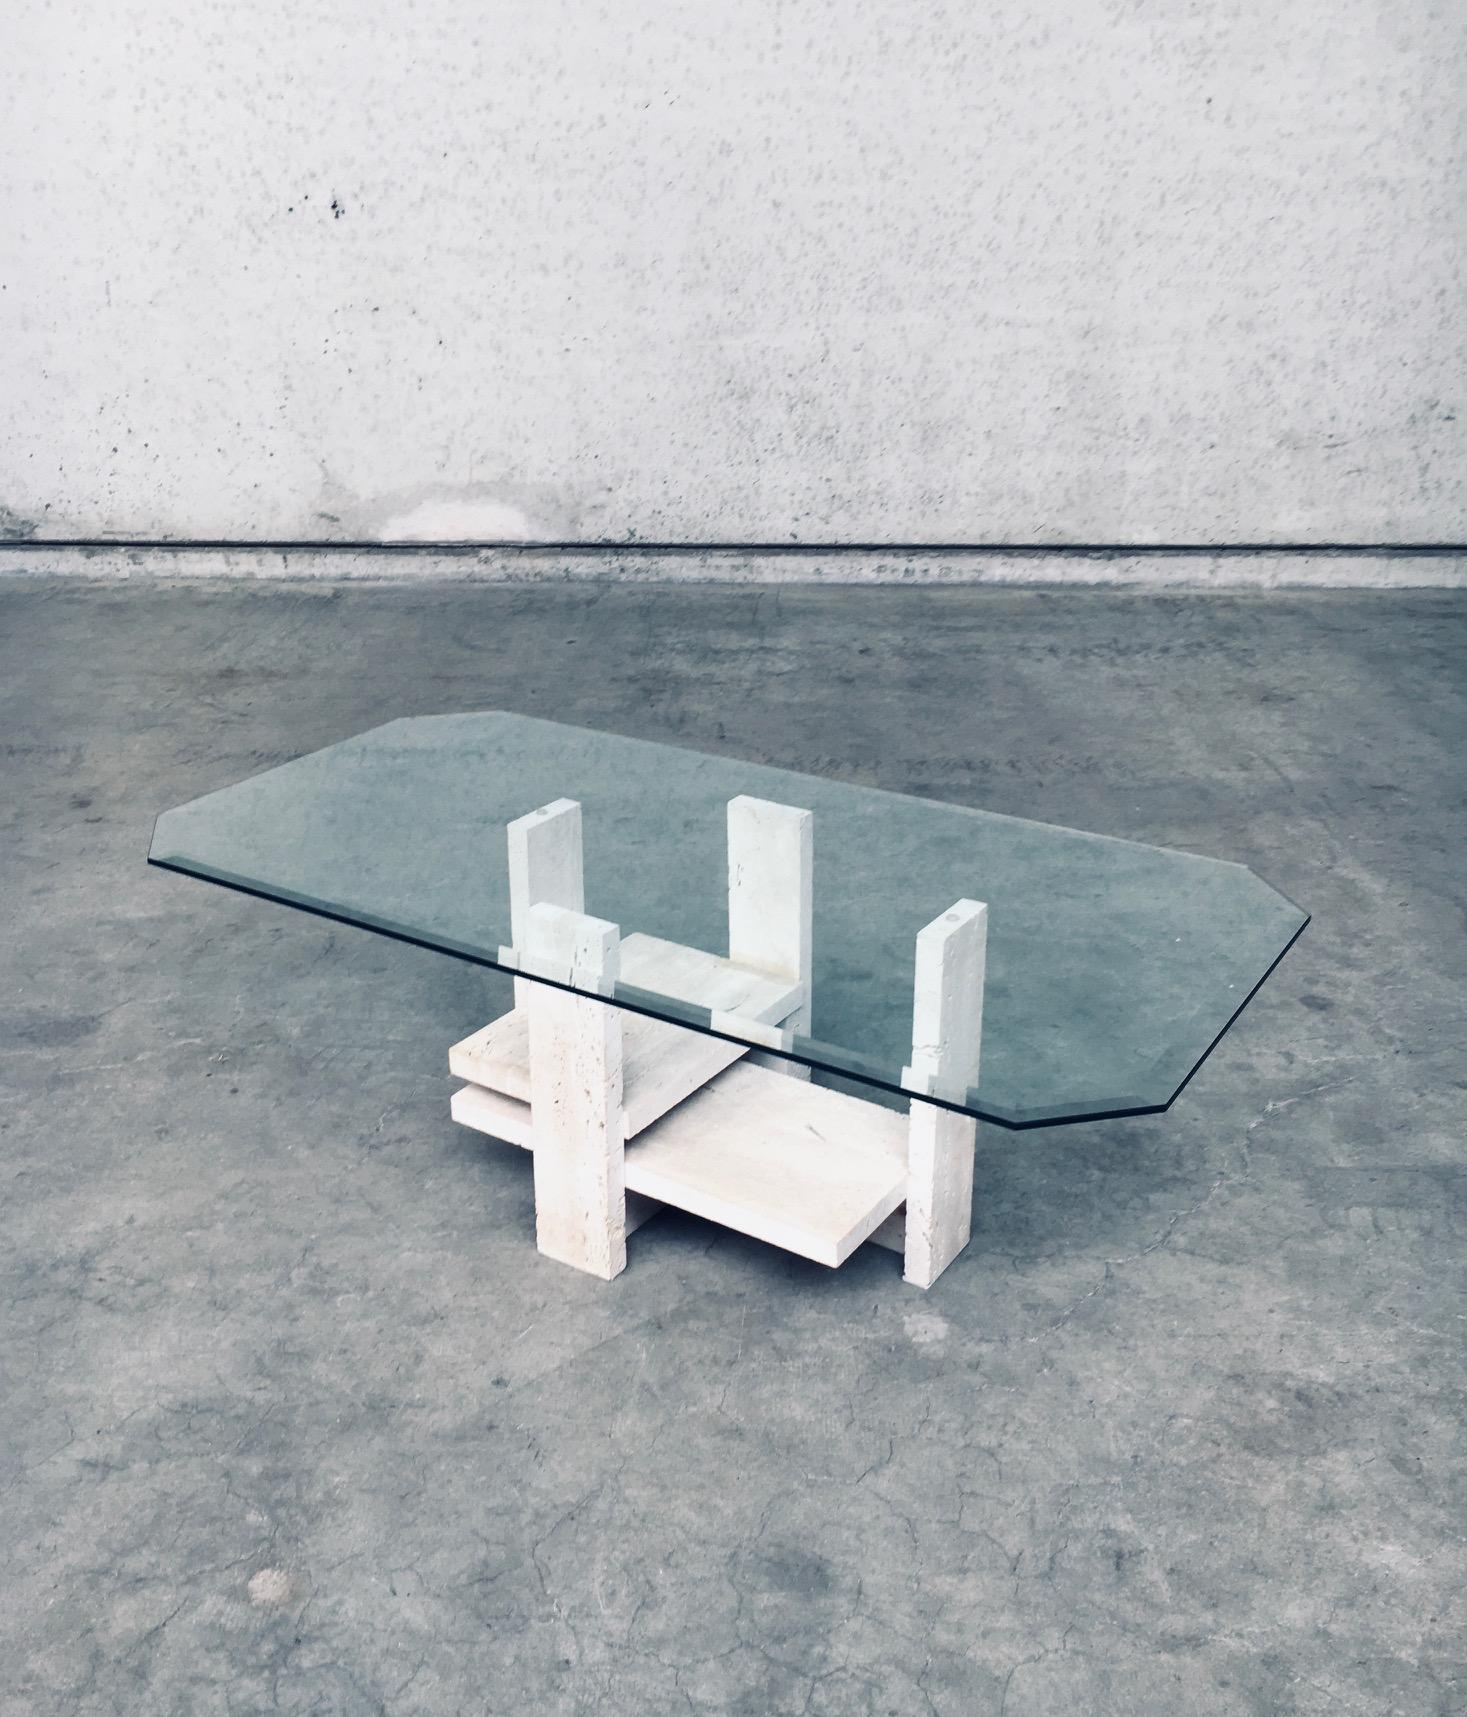 Brutalist Design Travertine Coffee Table by Willy Ballez, Belgium 1970's For Sale 10